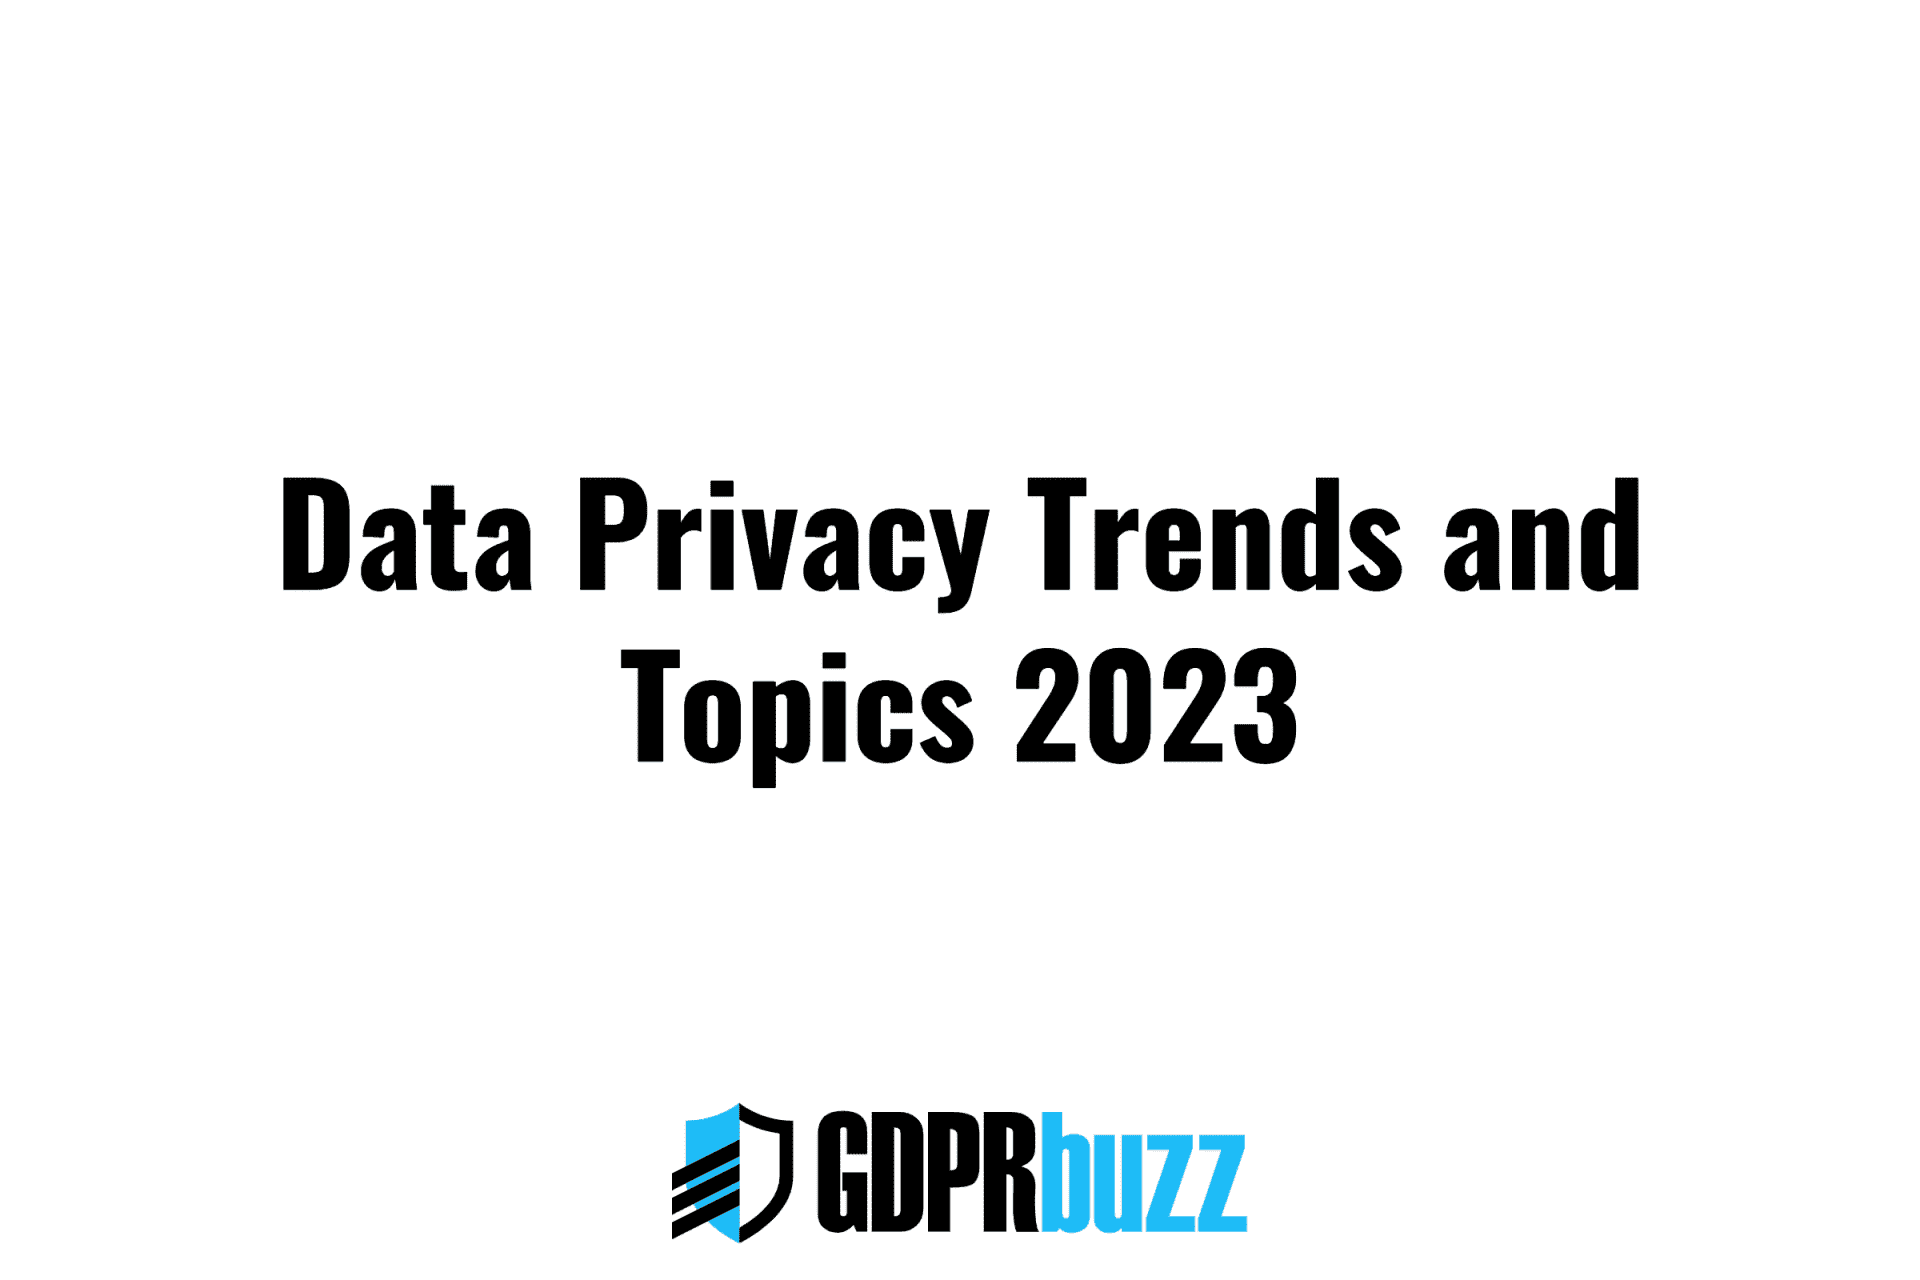 Data privacy trends and topics 2023